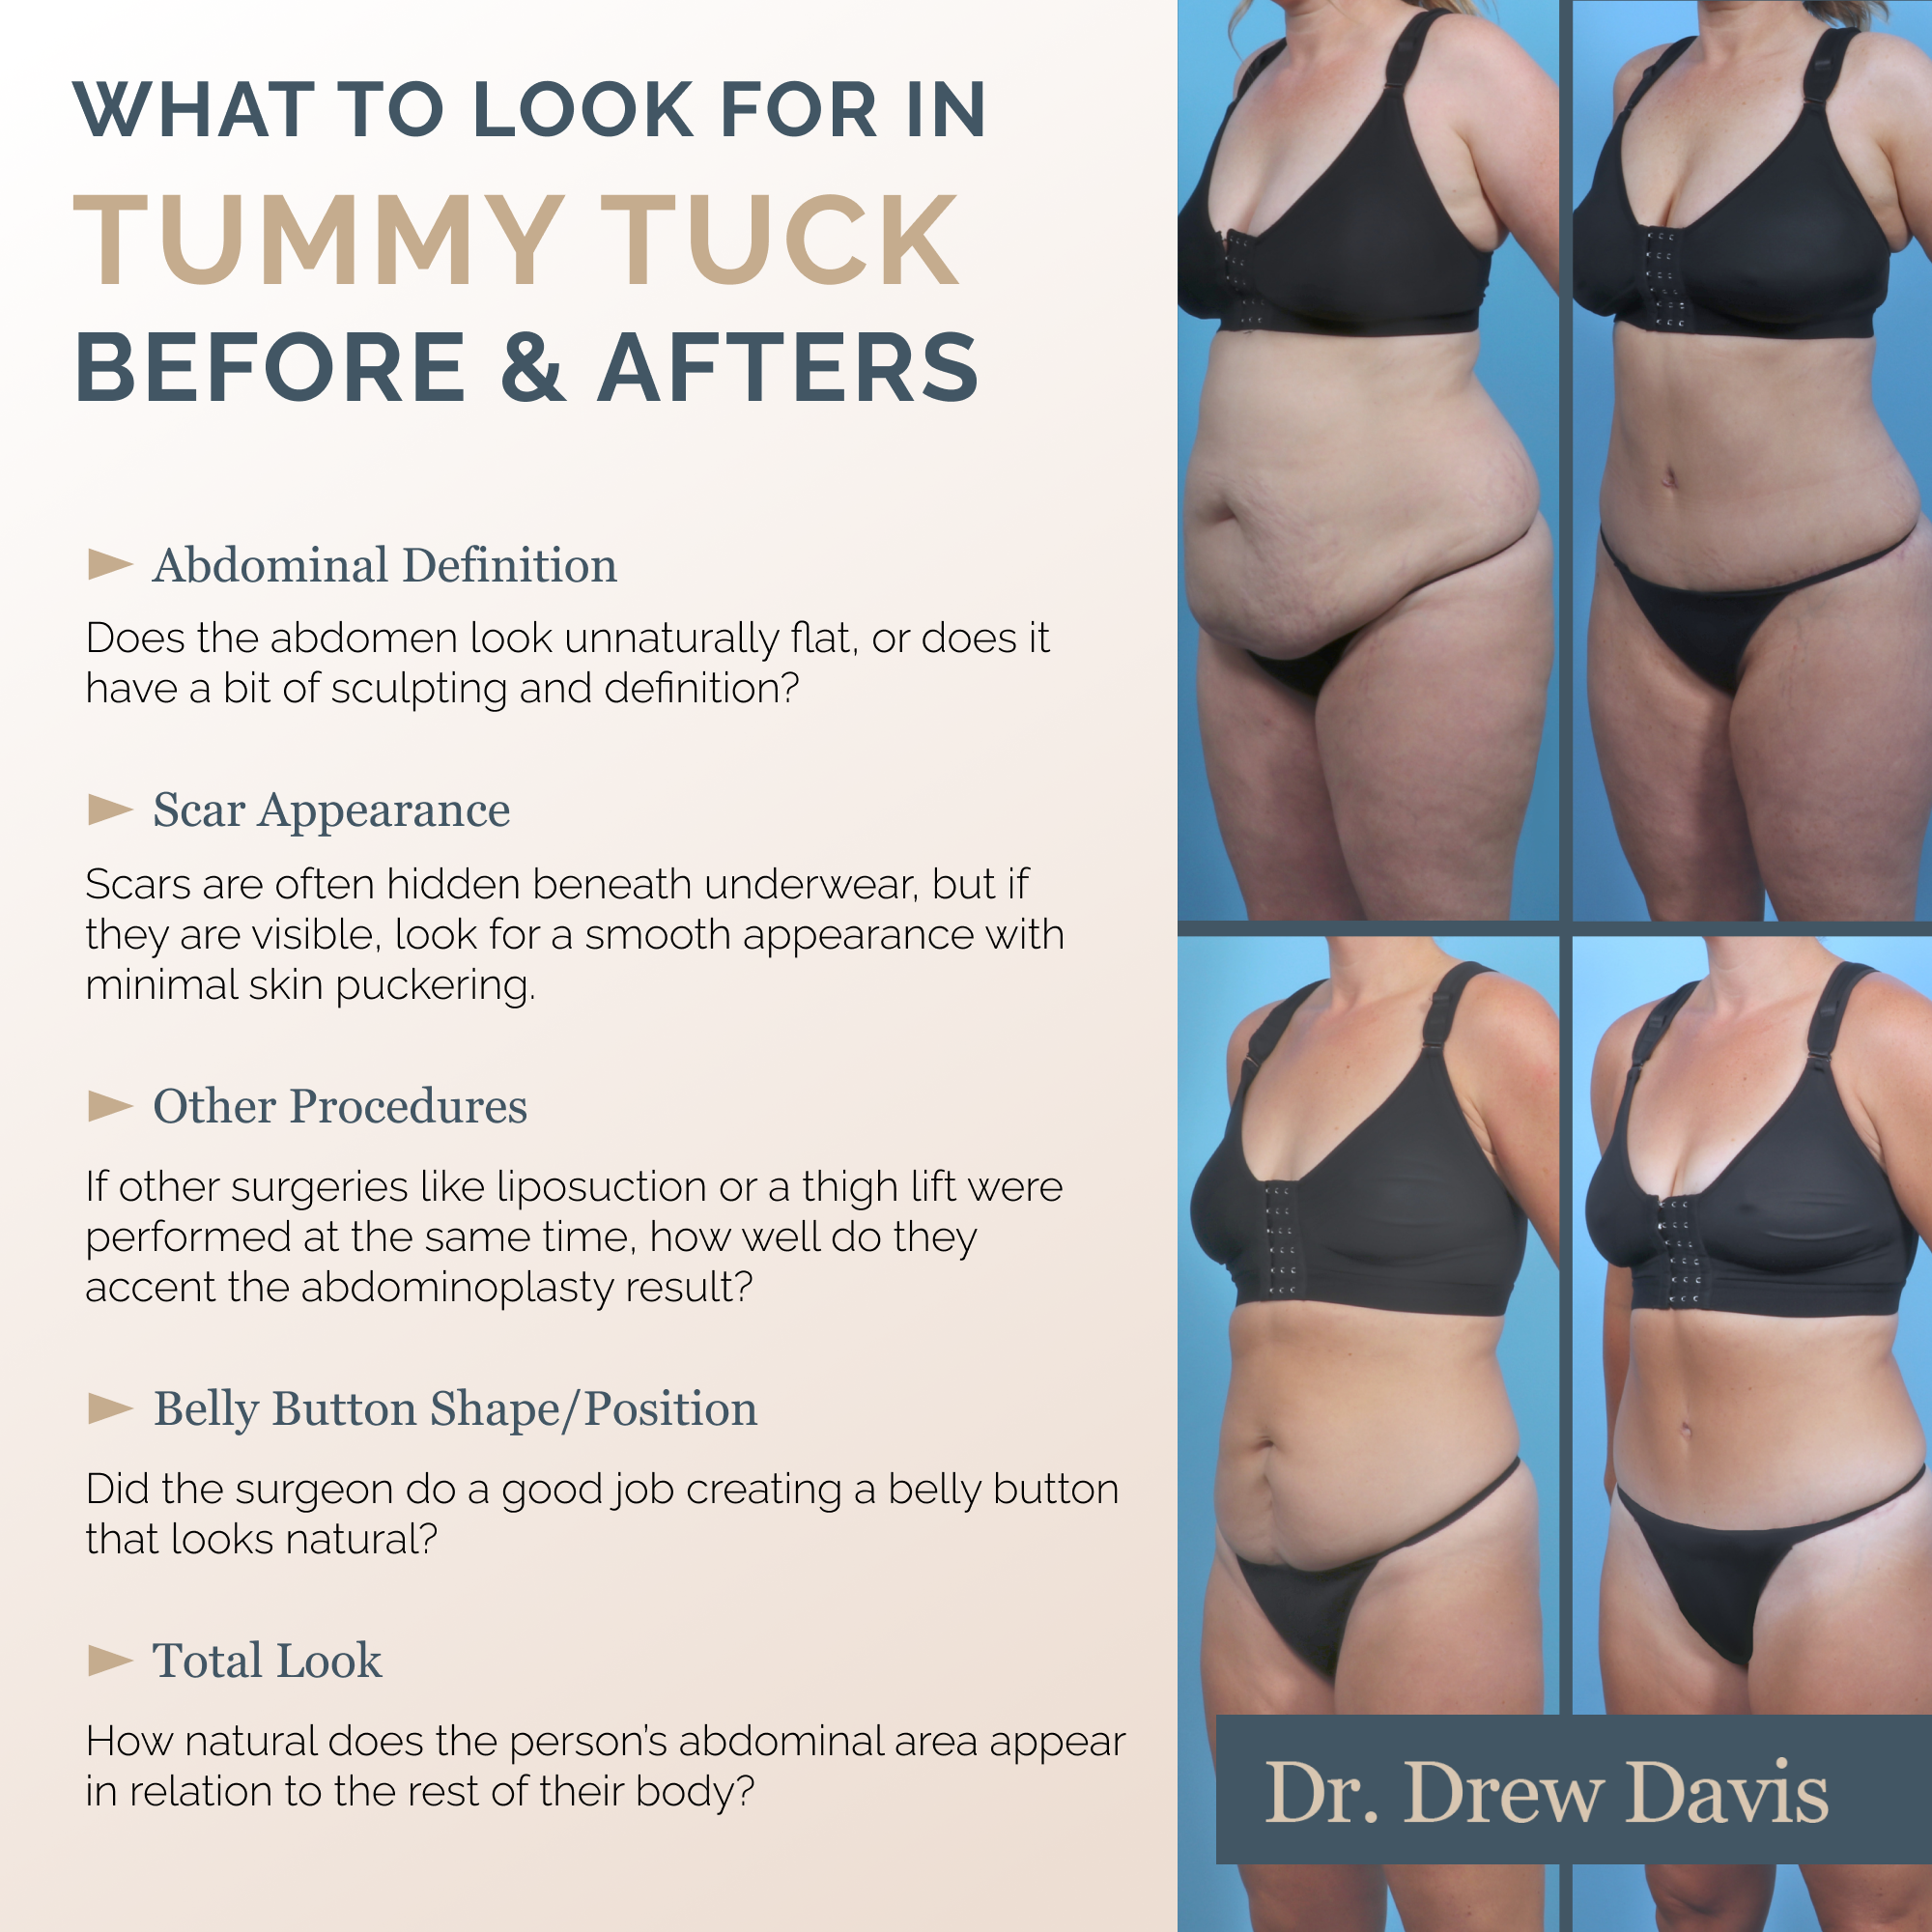 What to Look for in Tummy Tuck Before & Afters